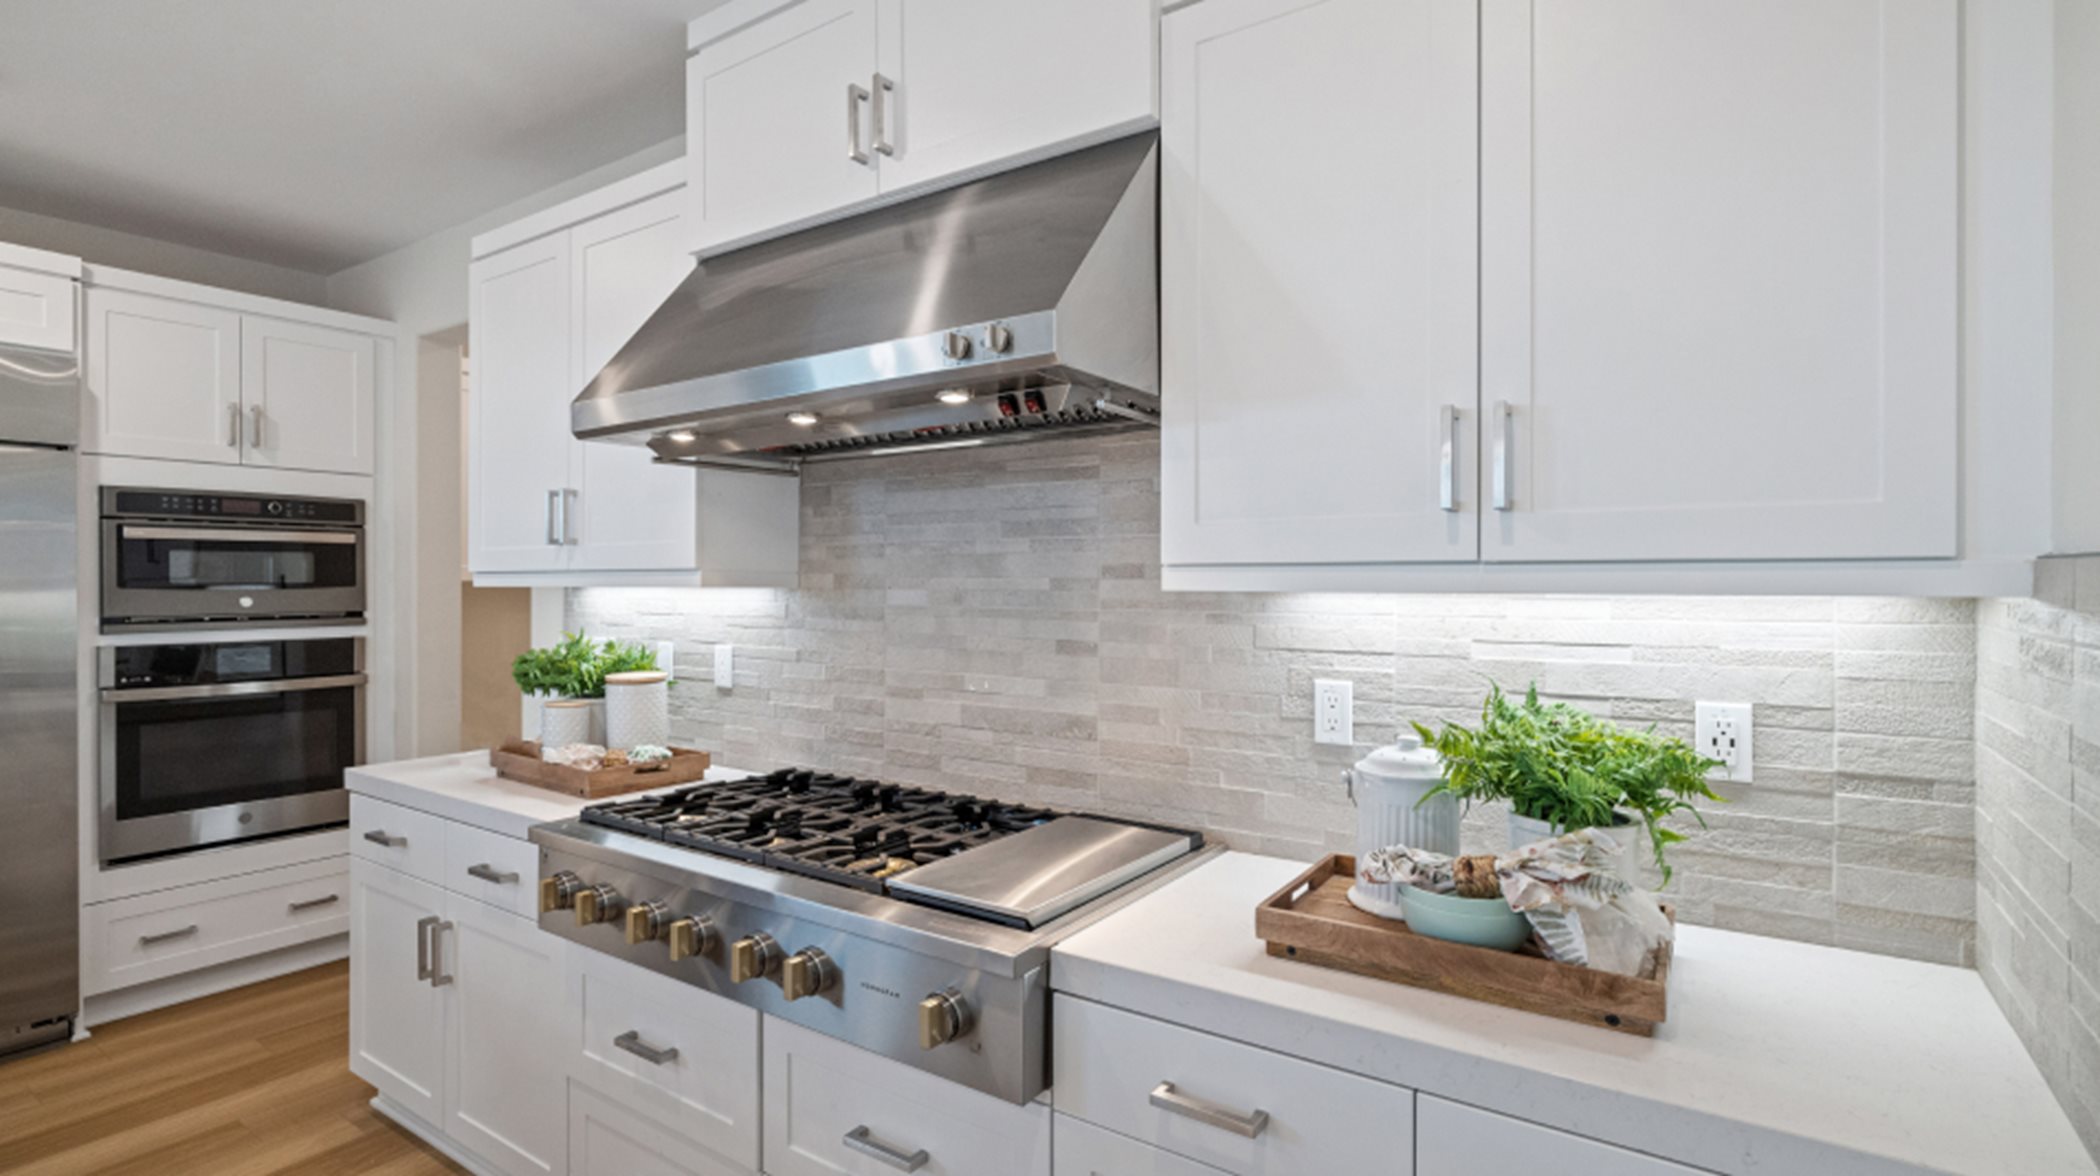 Cooktop and cabinetry